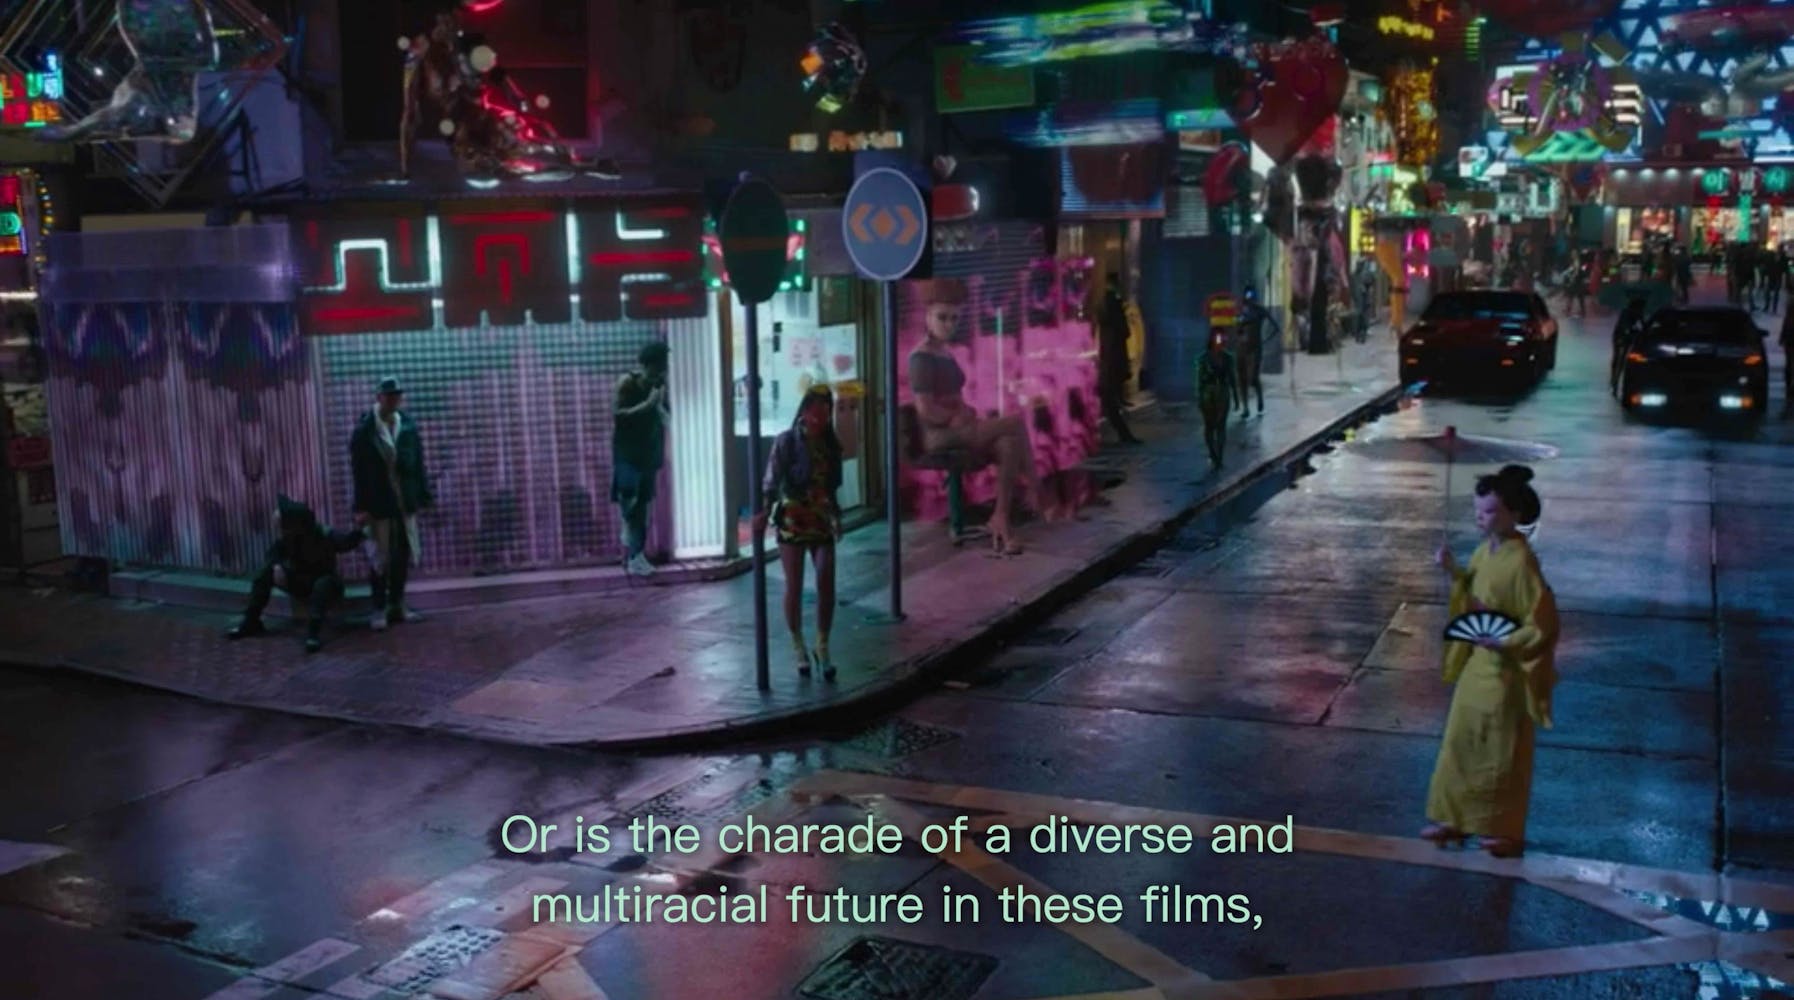 A woman walks across a city street corner with subtitles “Or is the charade of a diverse and multiracial future in these films,”.